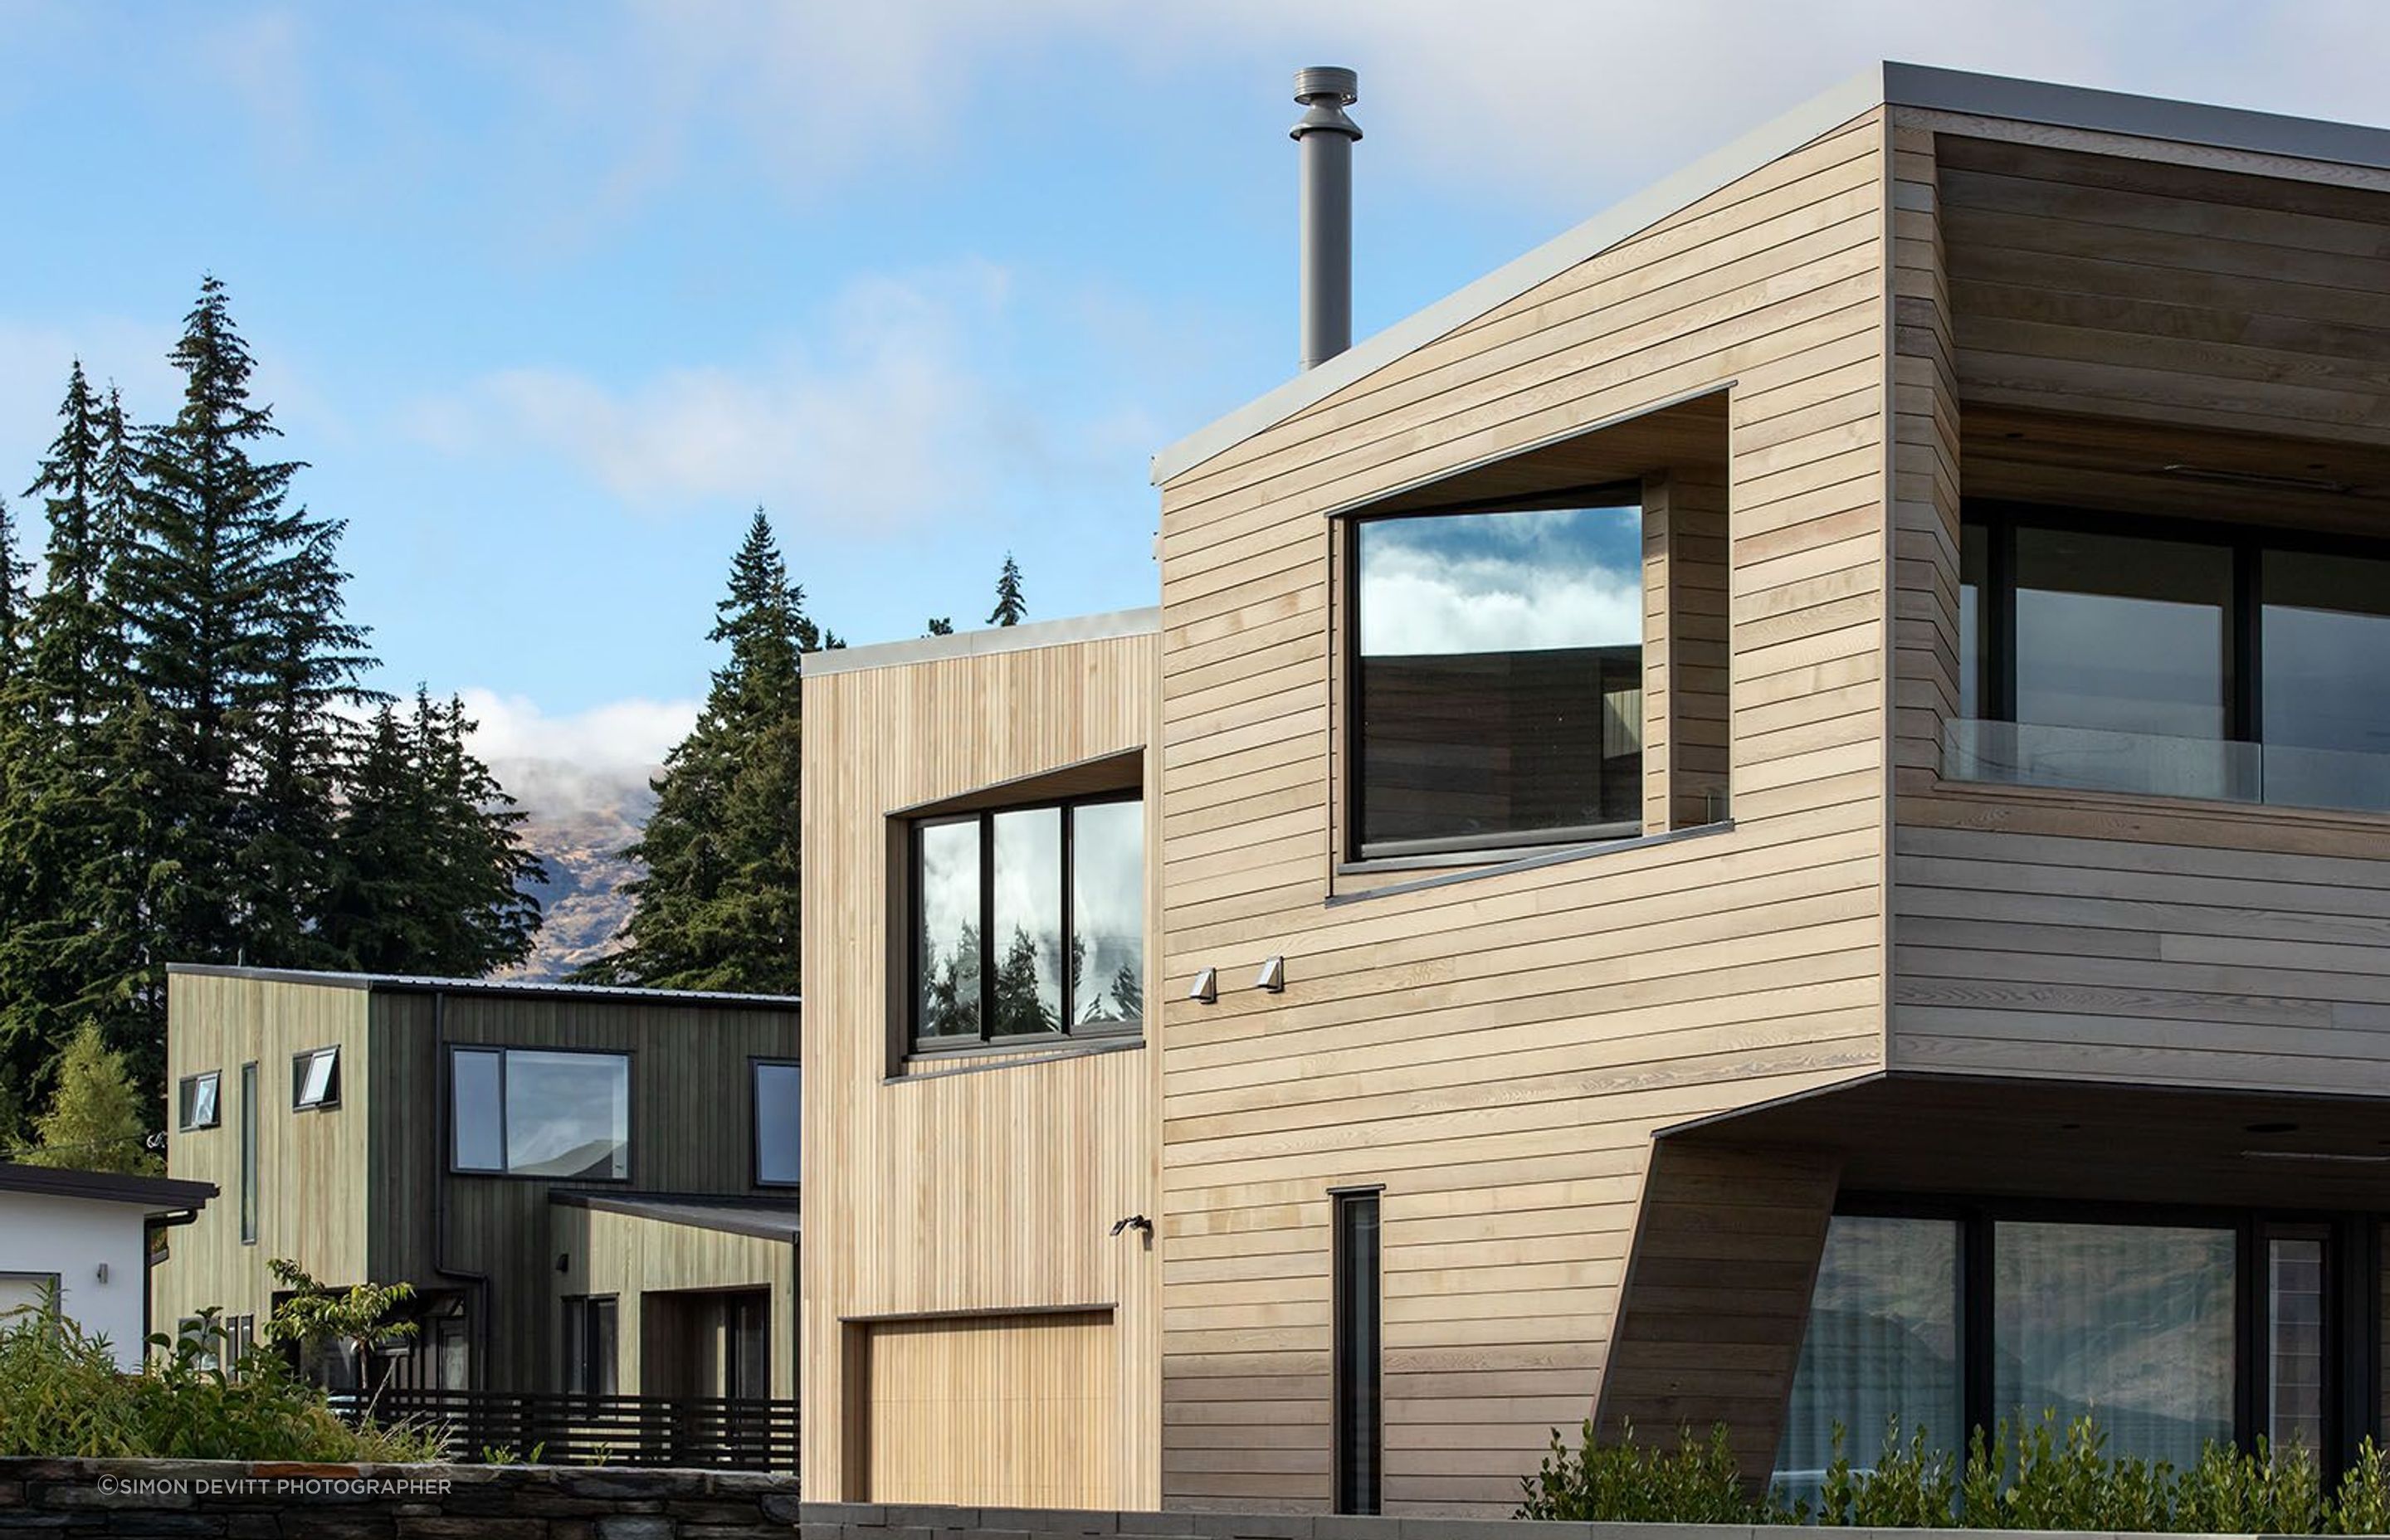 The cedar cladding is arranged both horizontally and vertically to break up the mass of the house. The mountain range can be seen from the rear windowns on the upper storey.